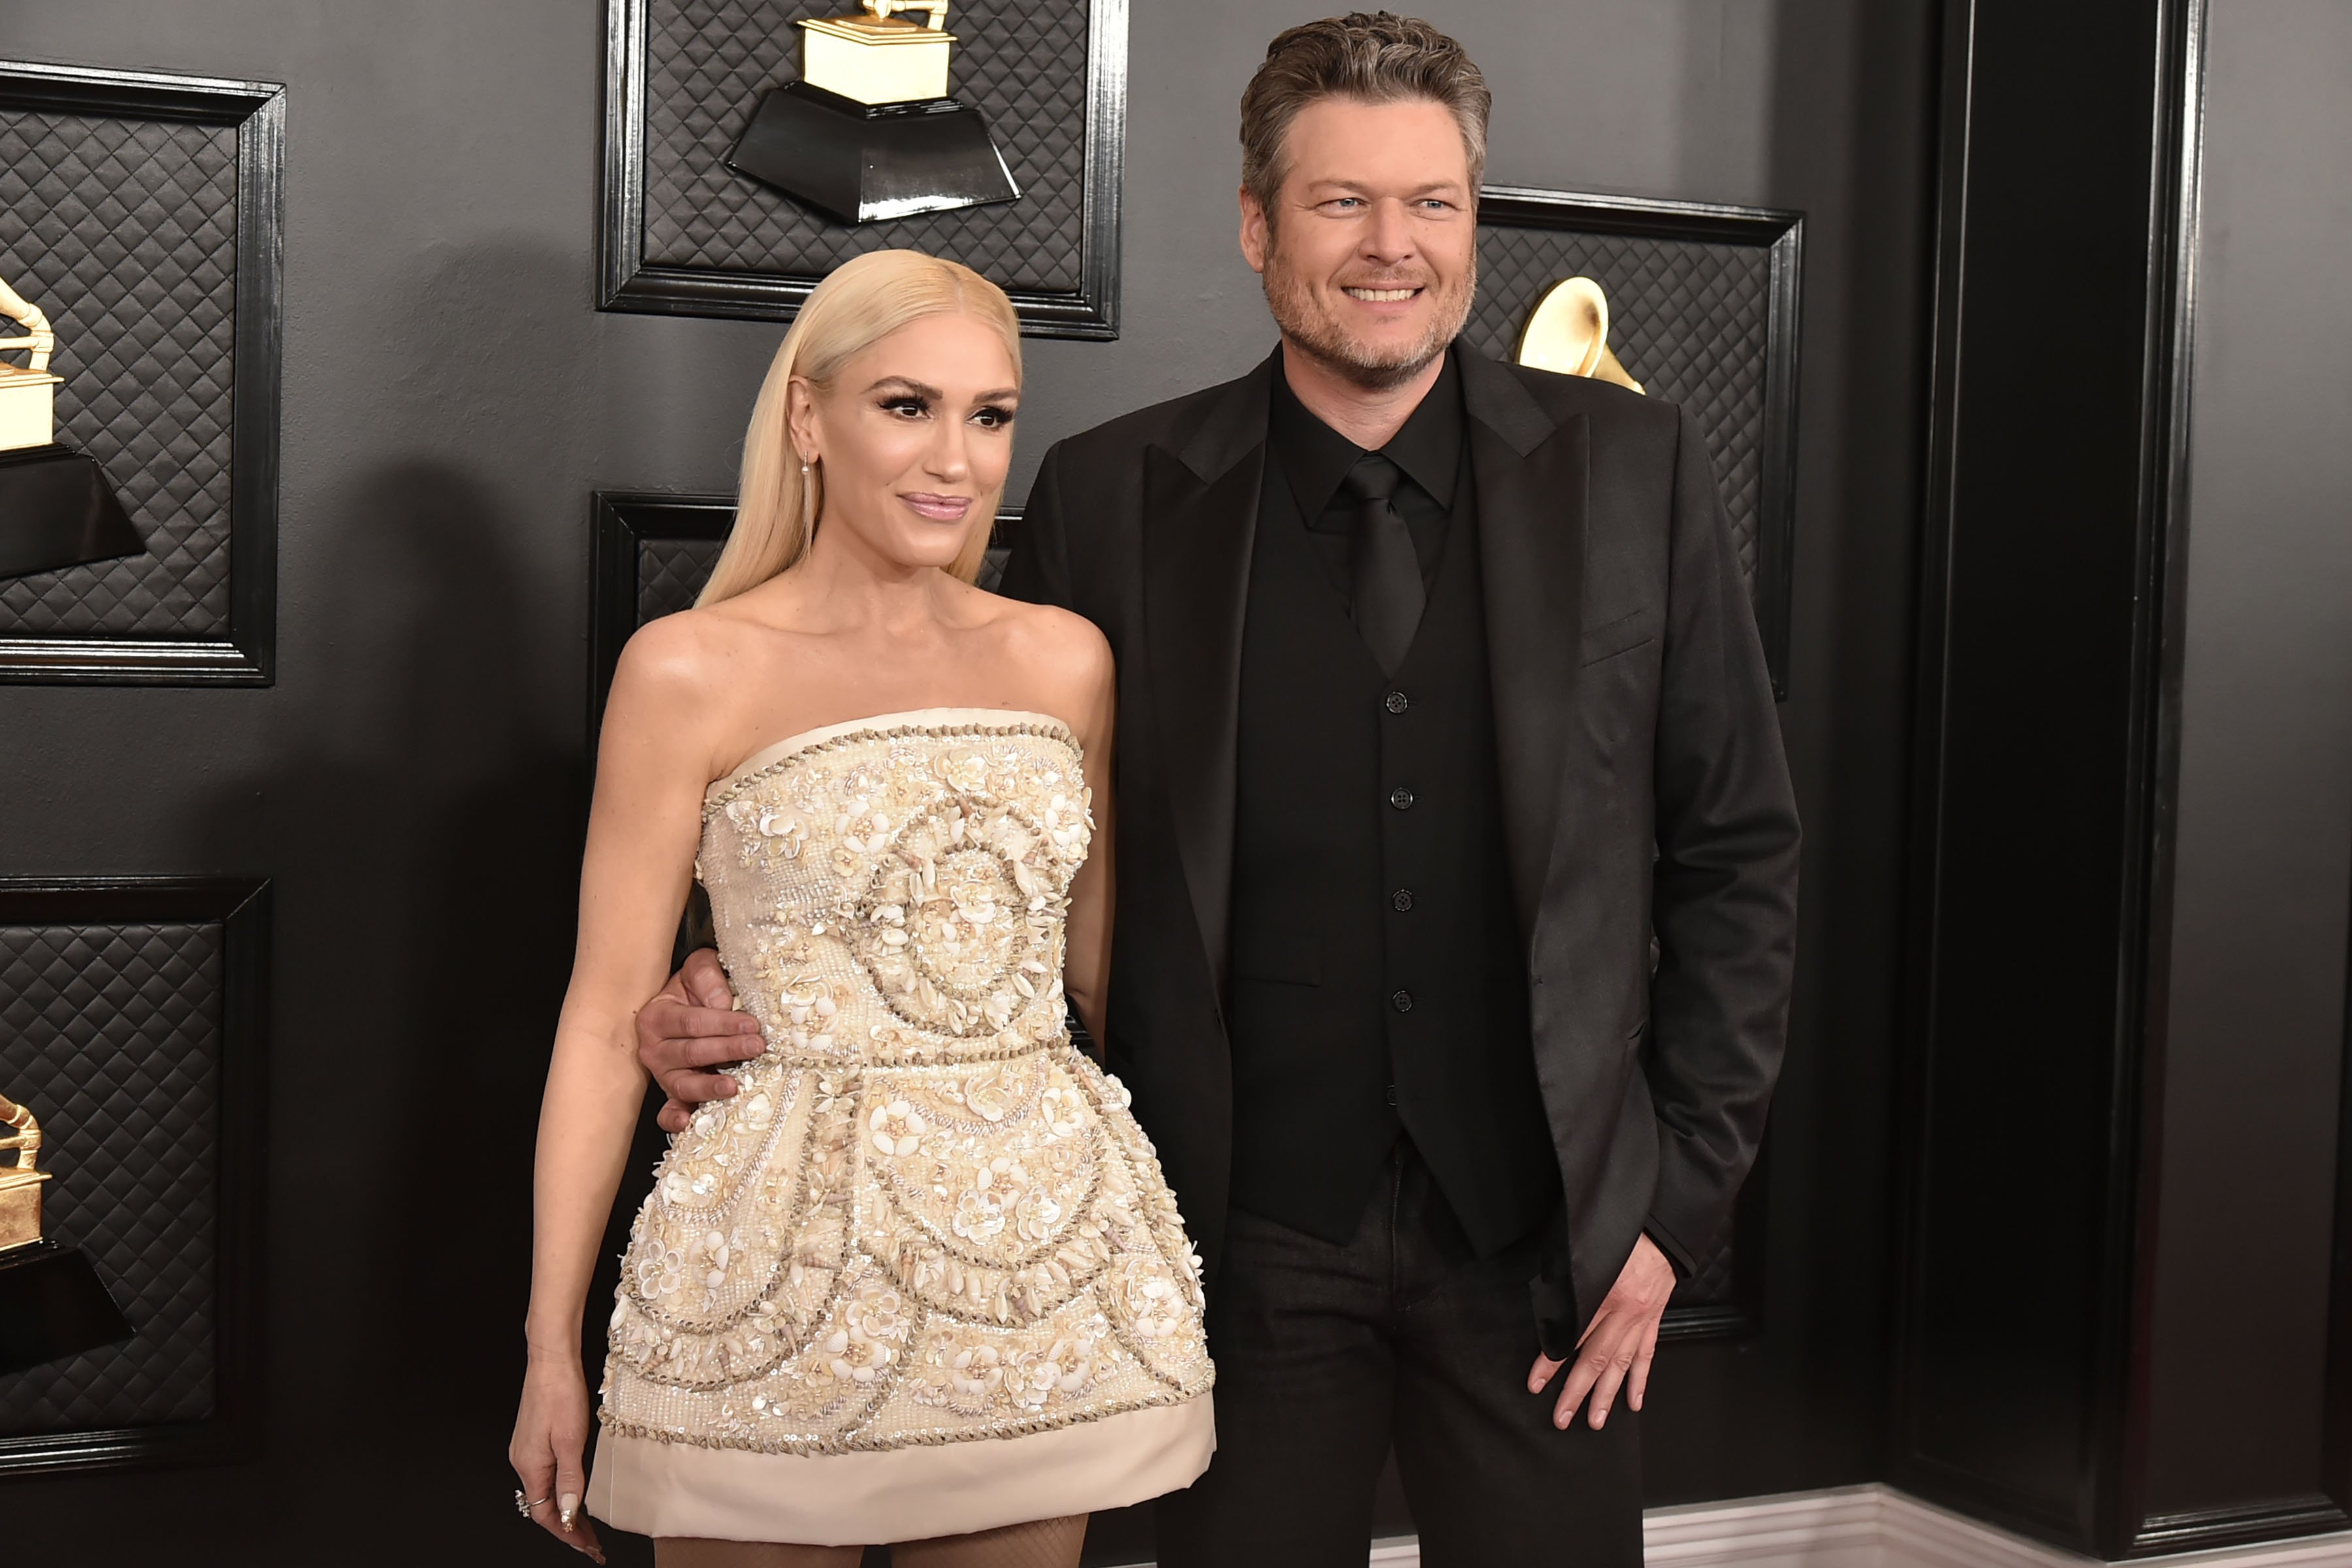 Pop singer Gwen Stefani and country singer Blake Shelton attend the 62nd Annual Grammy Awards at Staples Center on January 26, 2020 in Los Angeles, California | Source: Getty Images